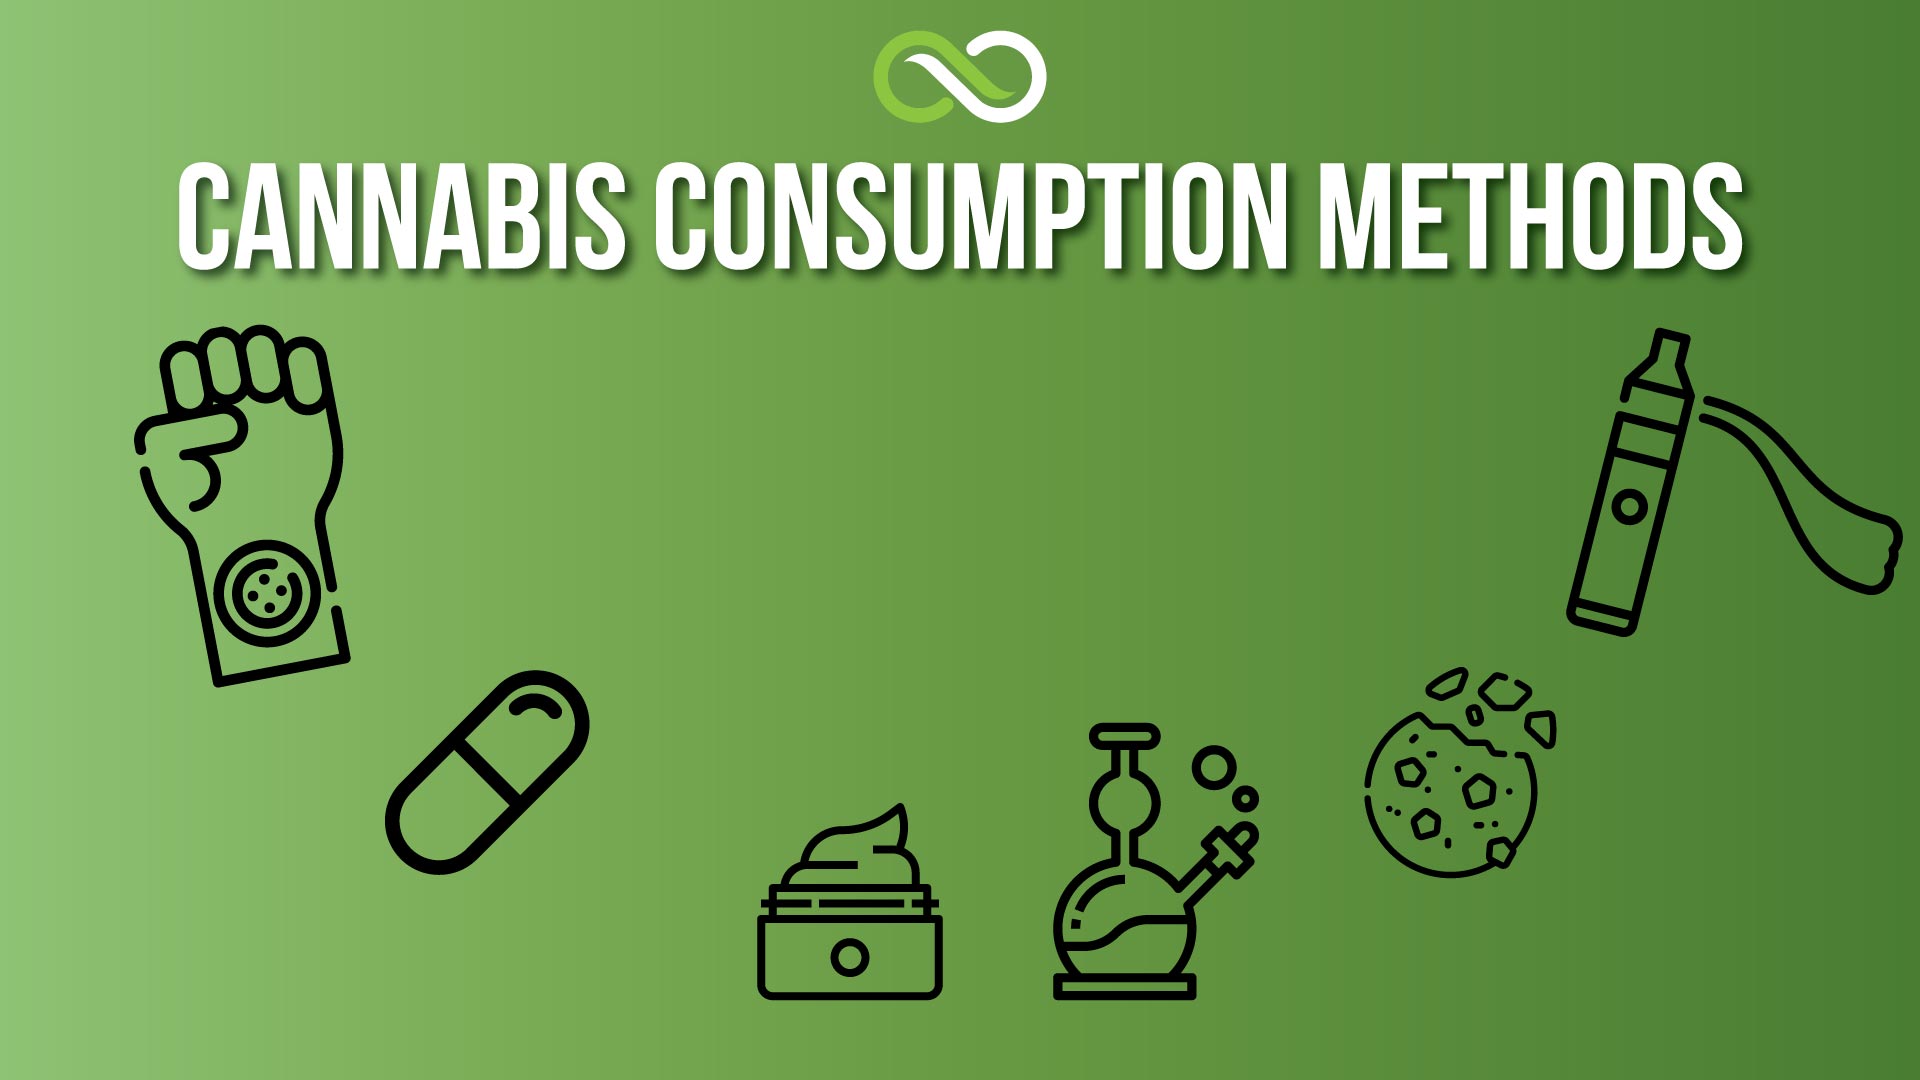 Cannabis Consumption Methods various accessories to consume cannabis pictured